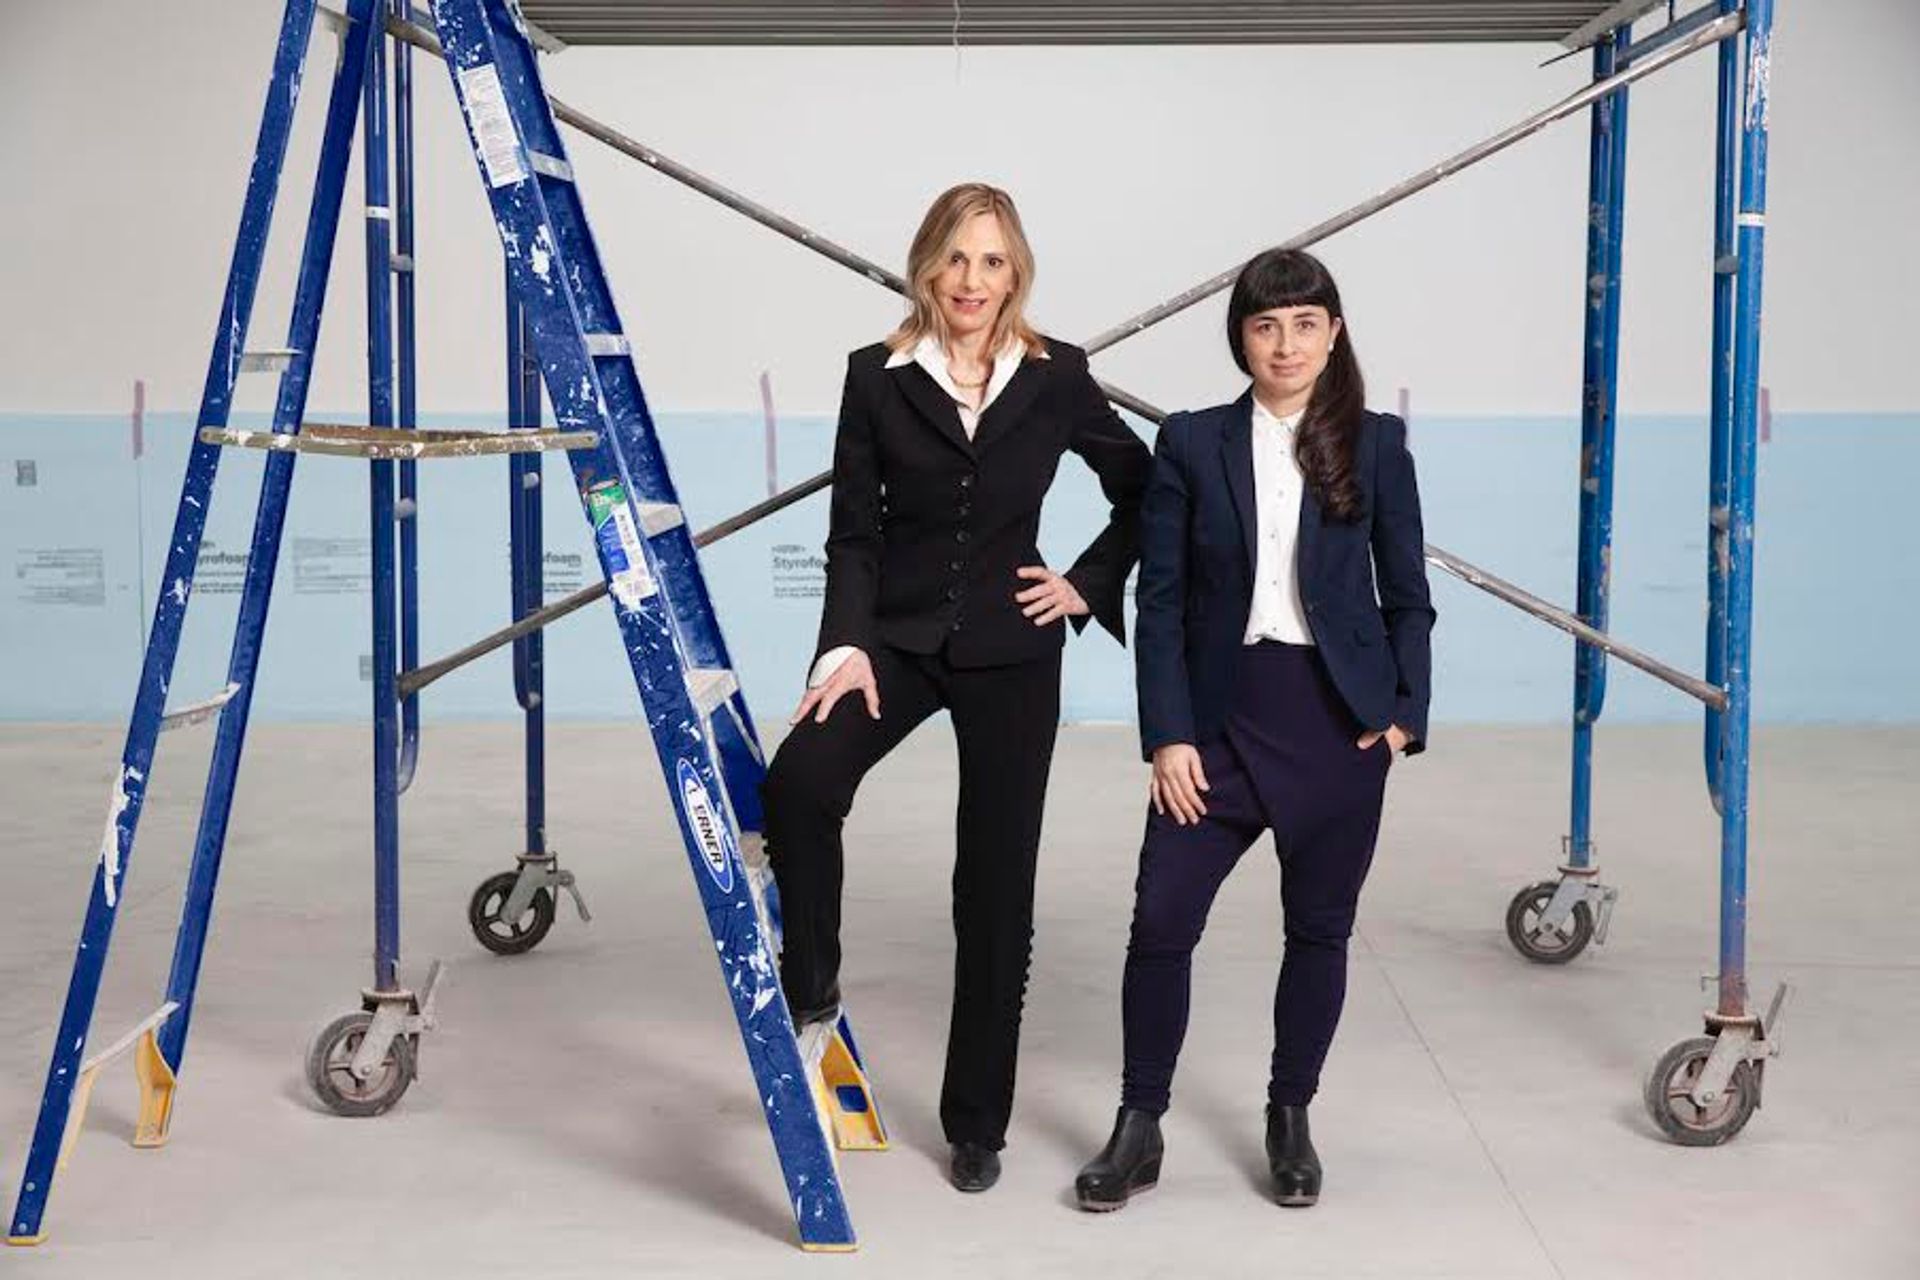 Amant Founder and chief executive Lonti Ebers with artistic director Ruth Estévez on site at the Amant Foundation Lyndsy Welgos. Courtesy the Amant Foundation.